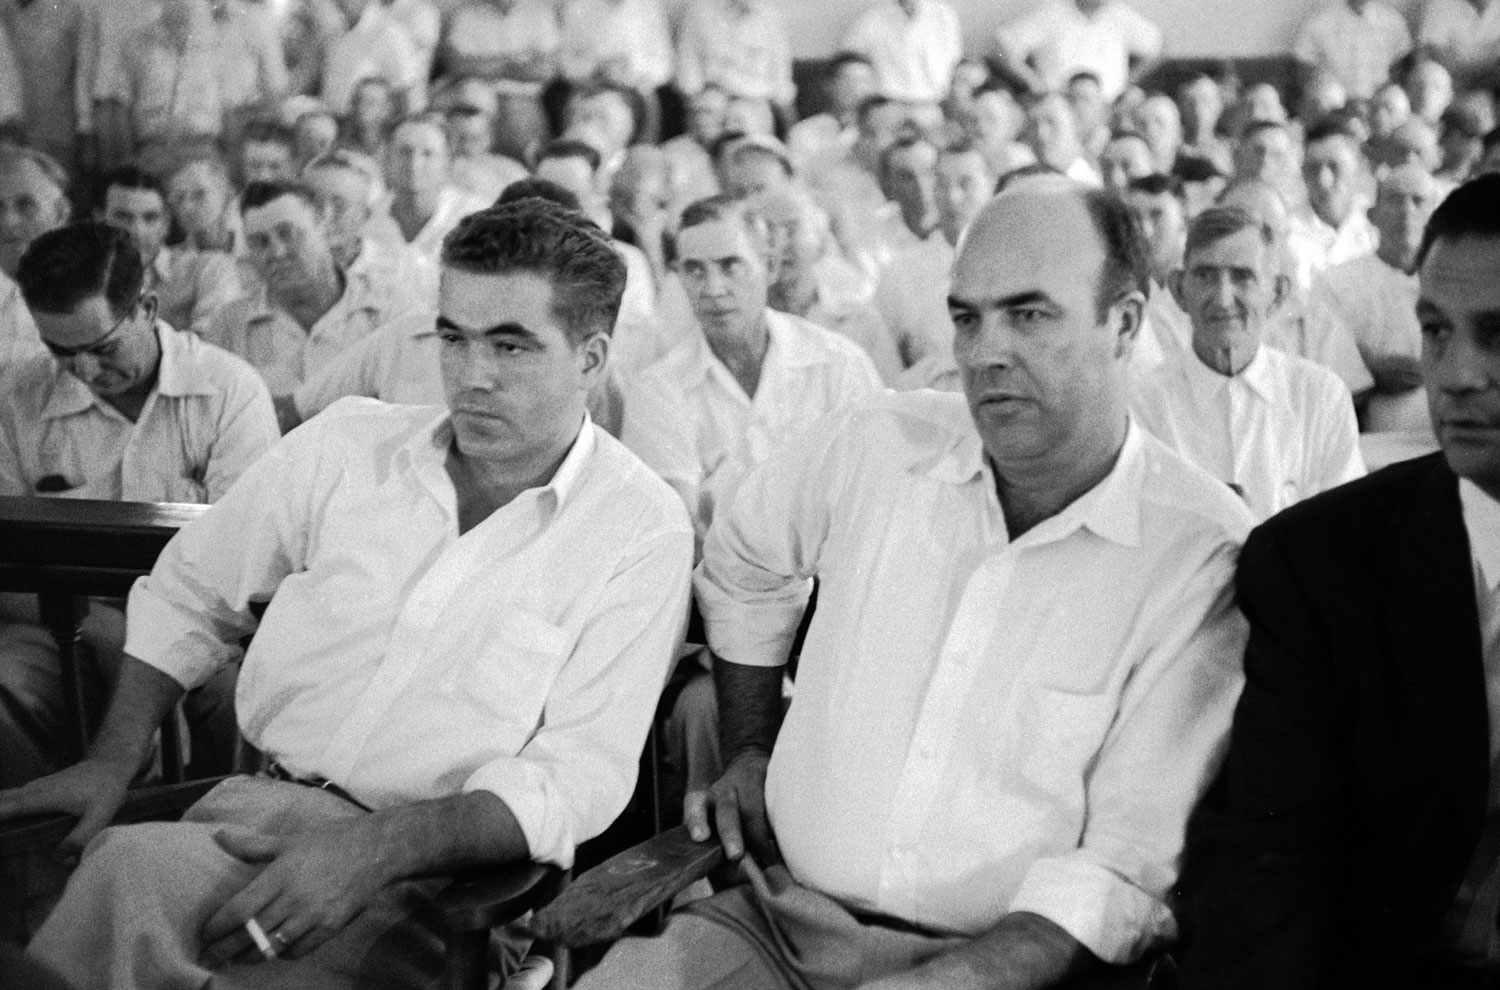 Defendants Roy Bryant, left, and J.W. Milam during their trial for the kidnapping and murder of Emmett Till.